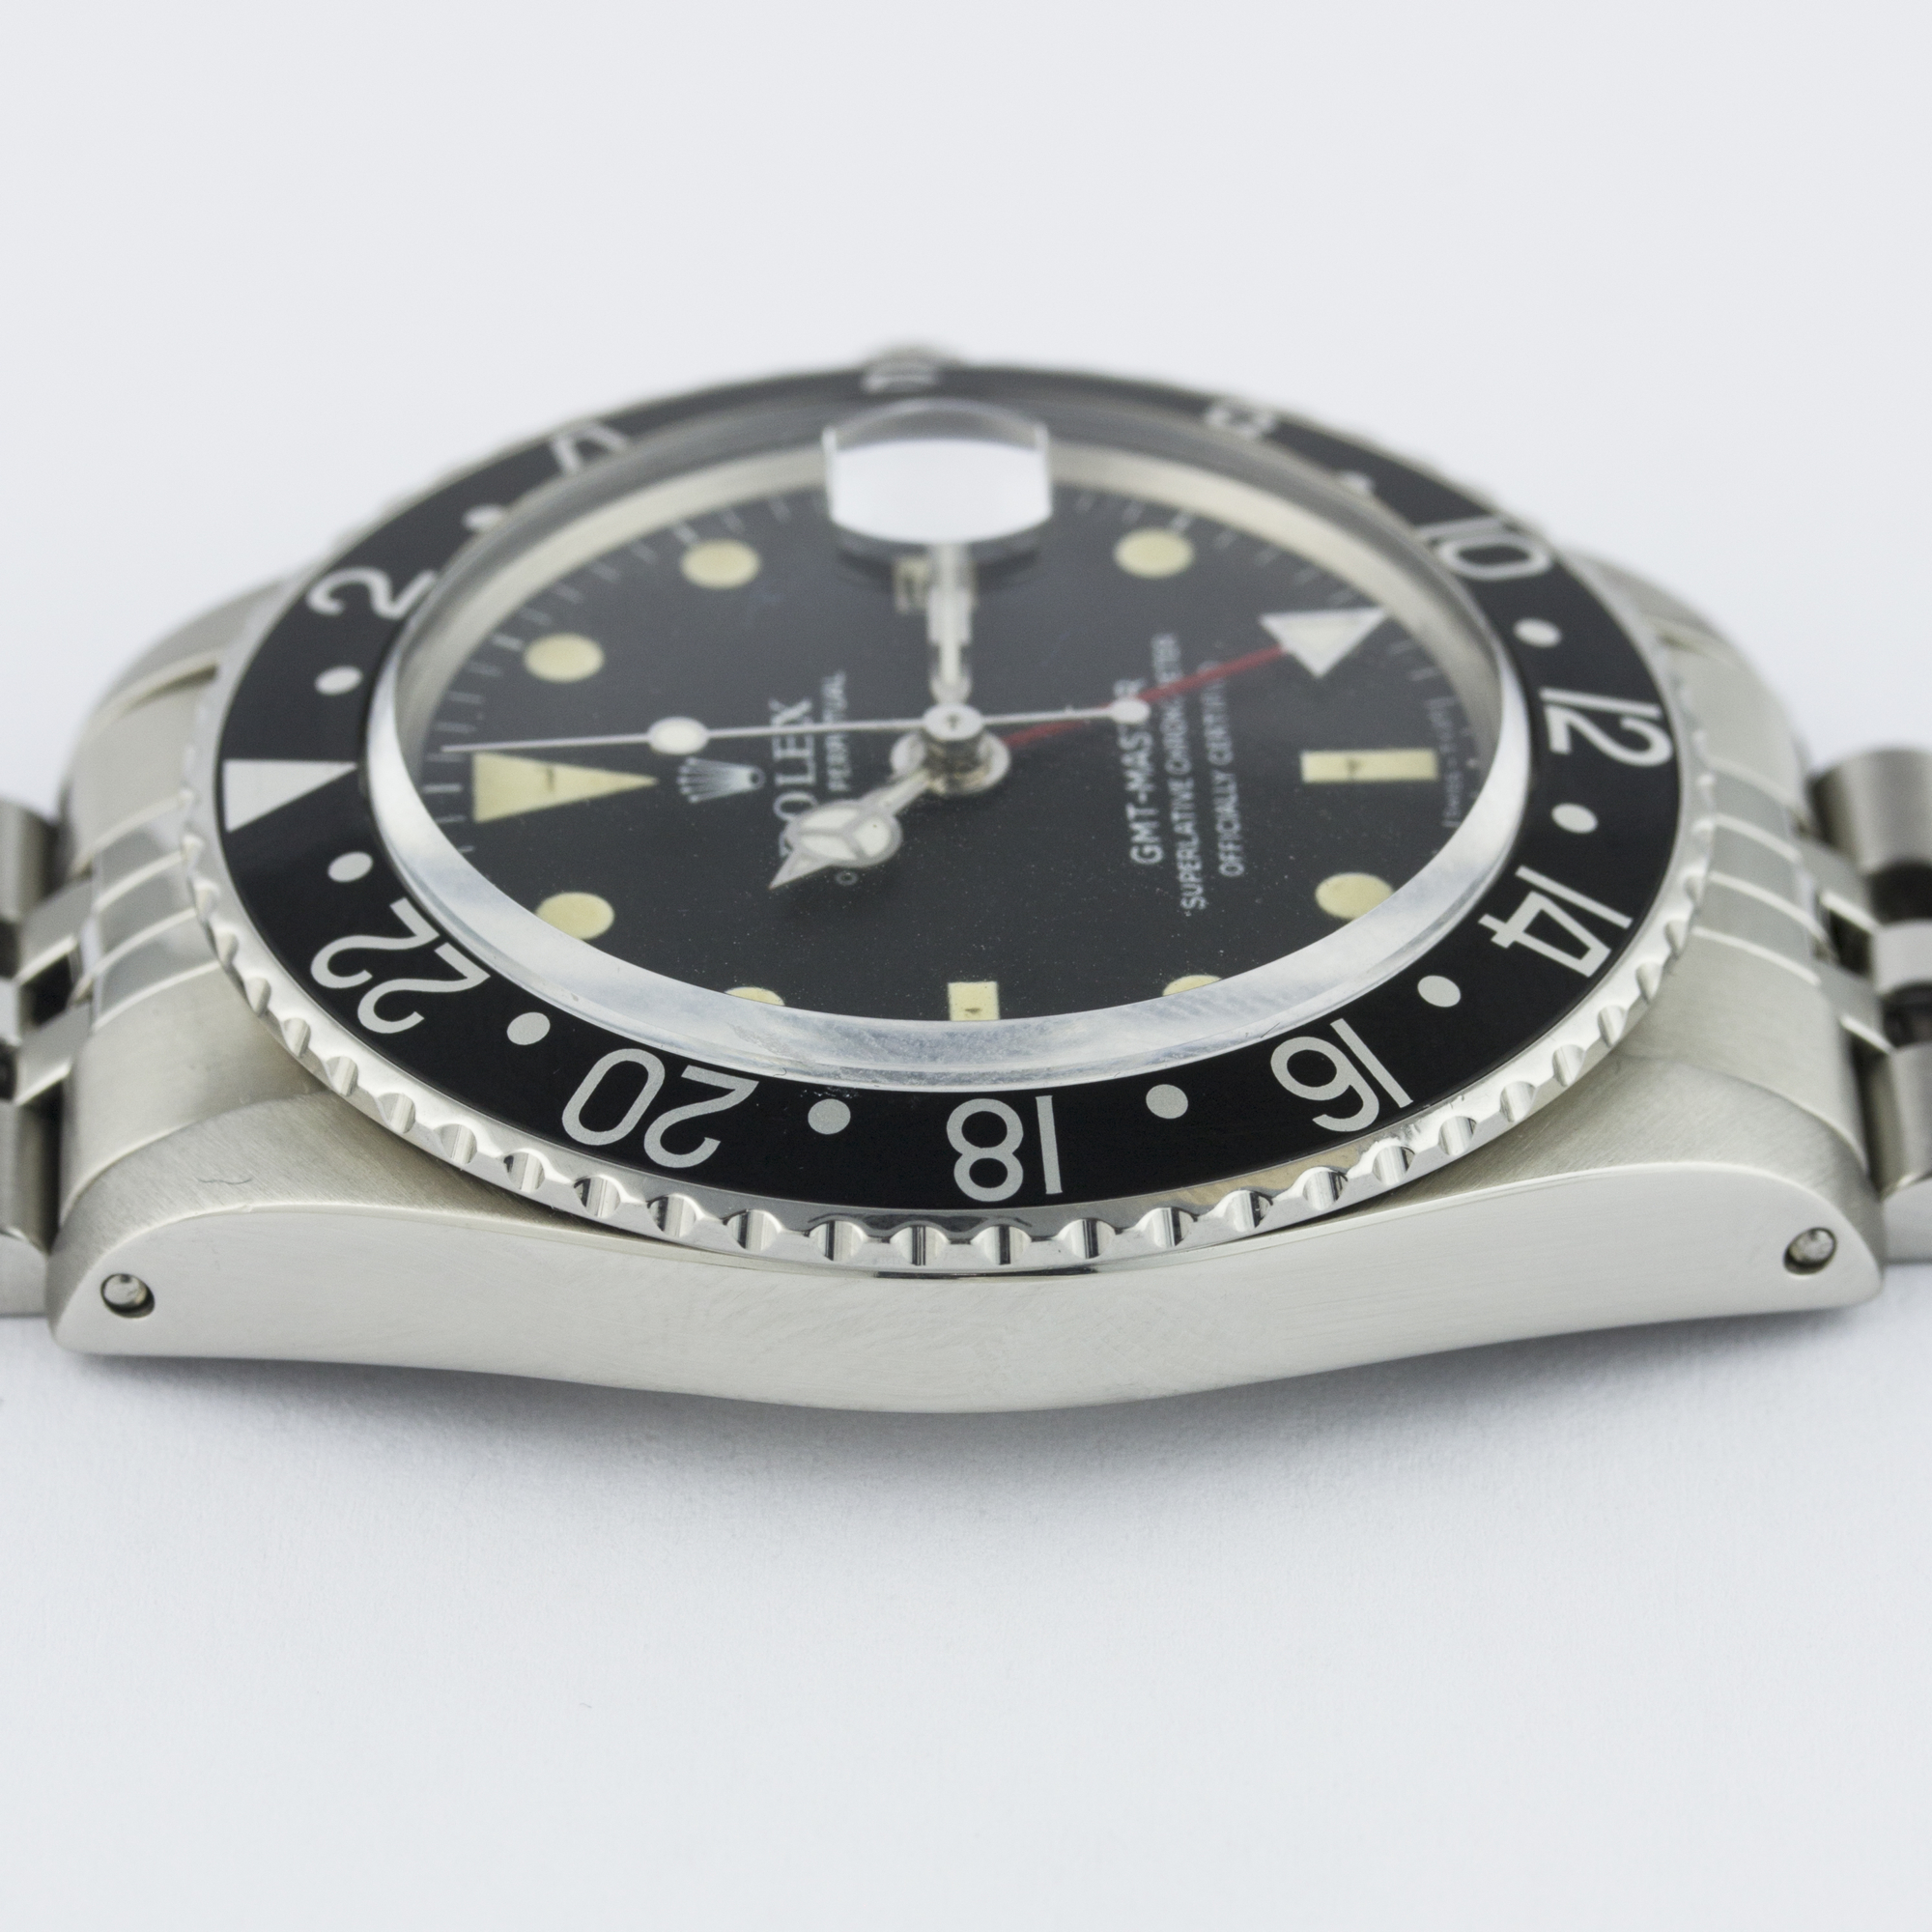 A RARE GENTLEMAN'S STAINLESS STEEL ROLEX OYSTER PERPETUAL GMT MASTER BRACELET WATCH CIRCA 1968, REF. - Image 10 of 11